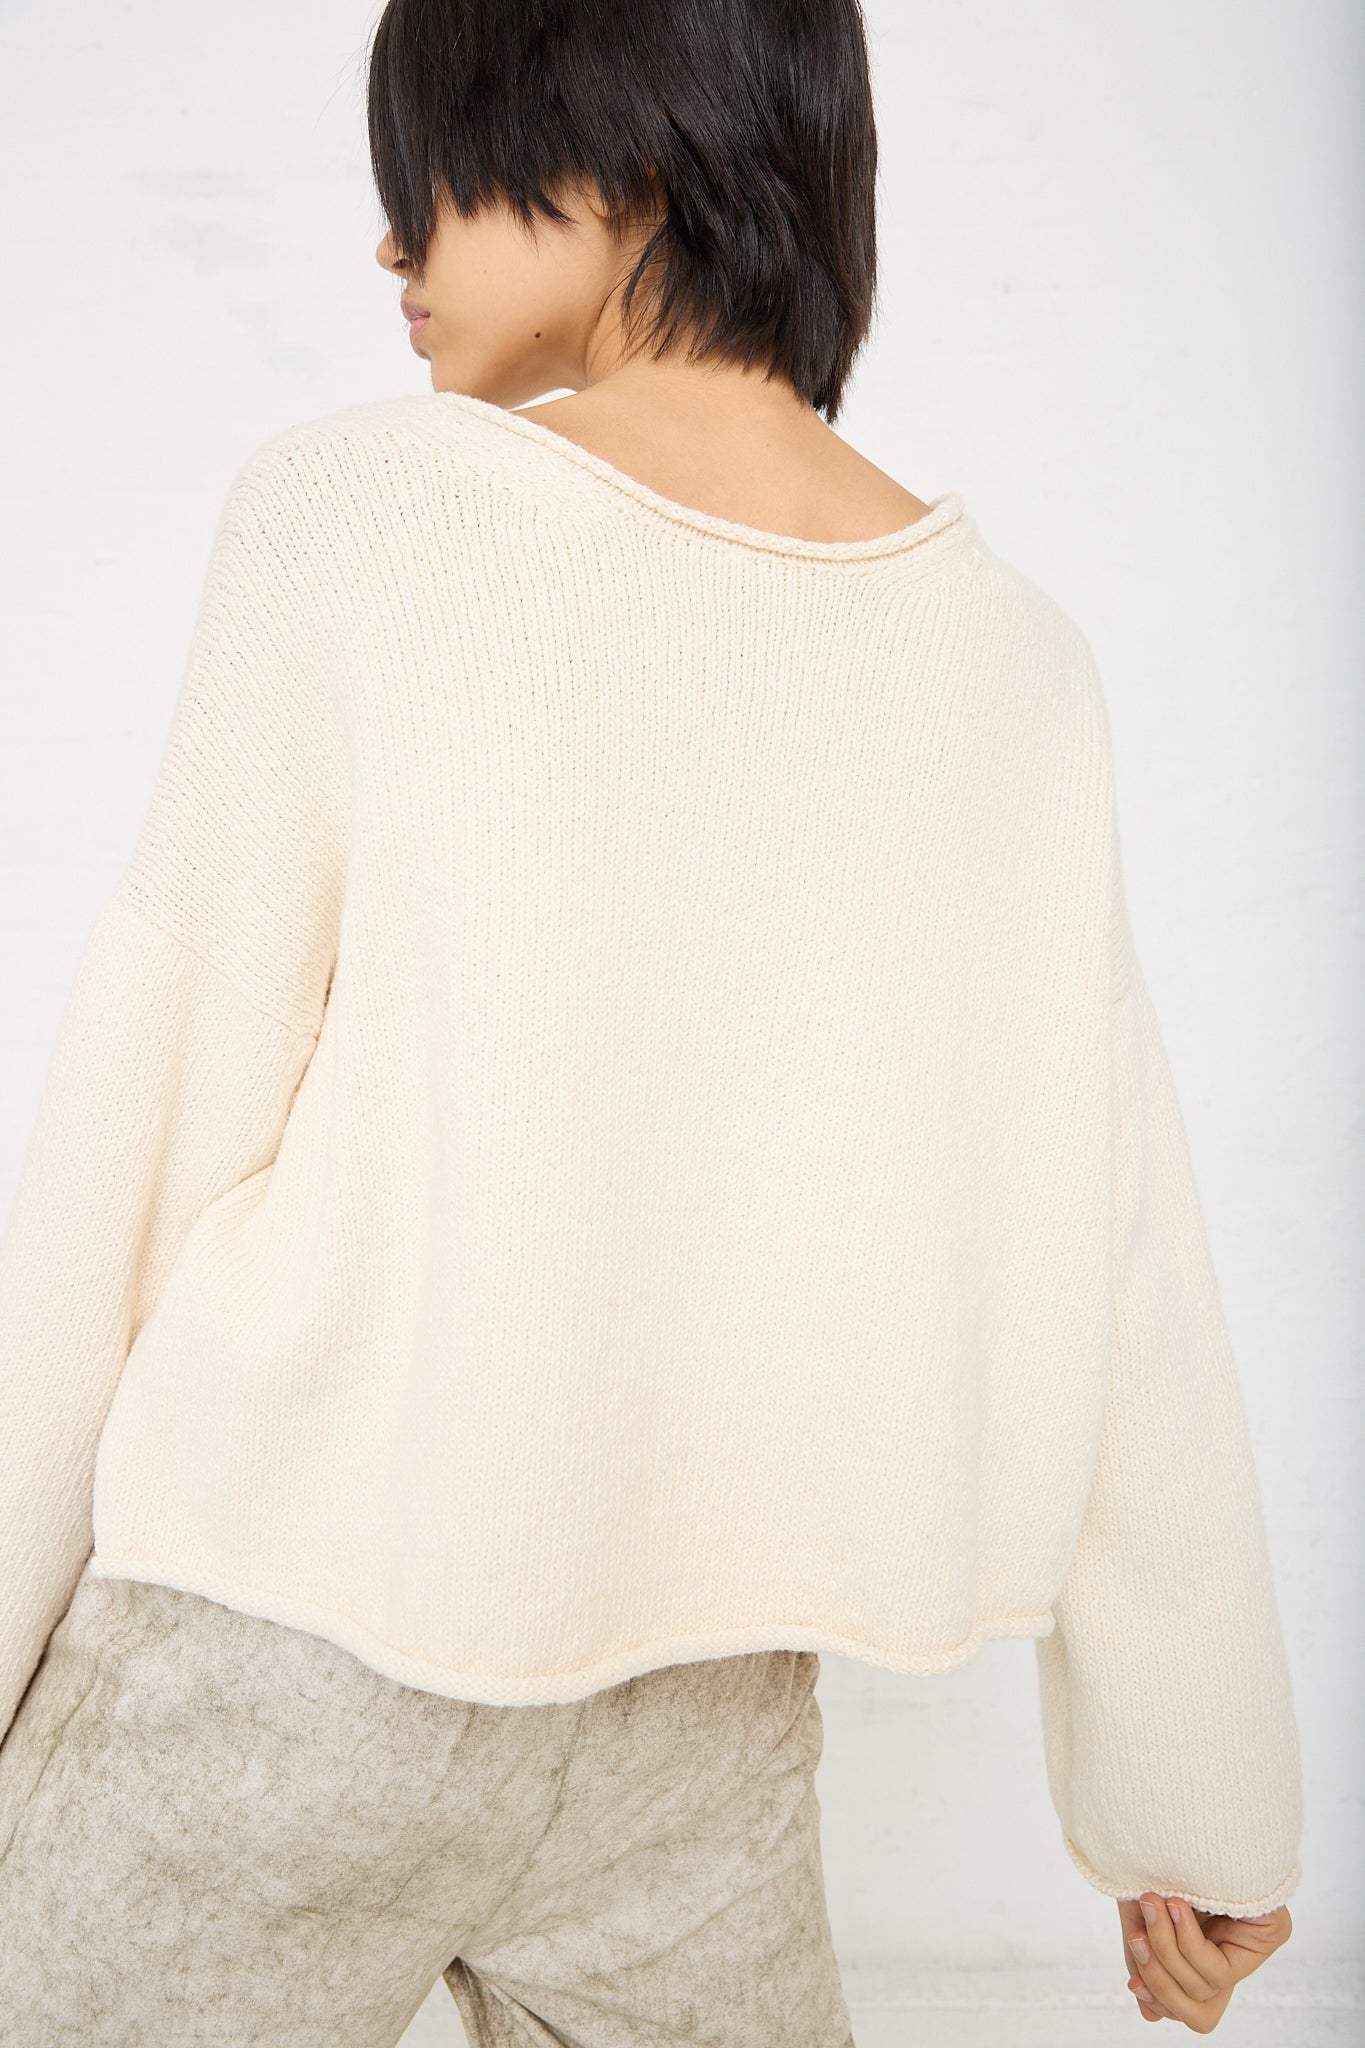 The back of a woman wearing a Lauren Manoogian Roving U Neck Sweater in Raw White.